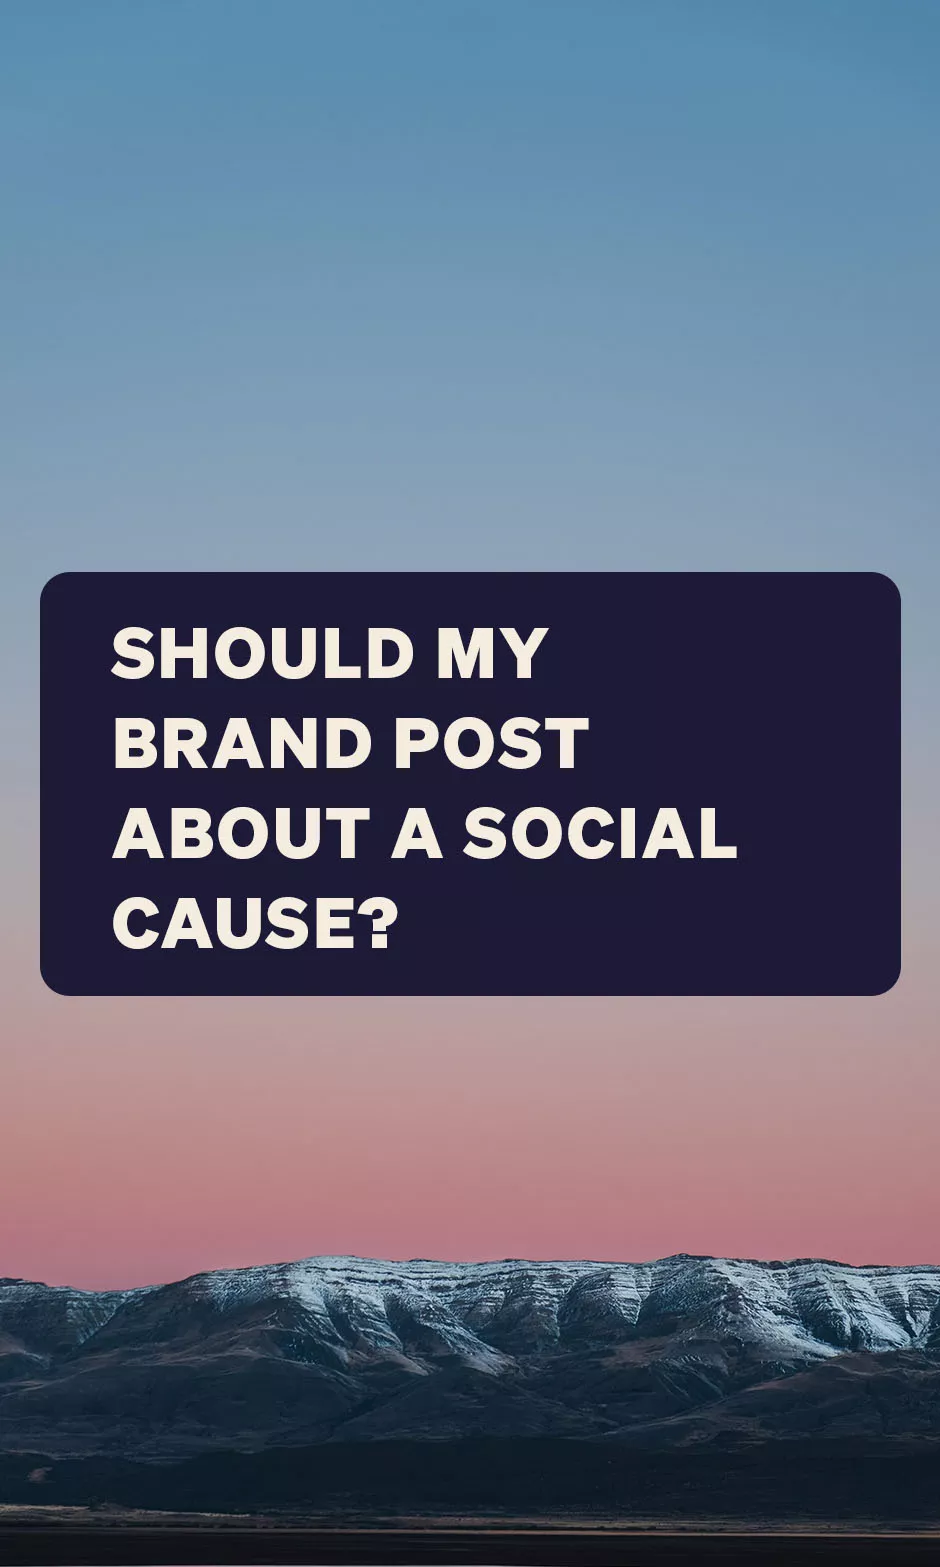 Should My Brand Post About A Social Cause?